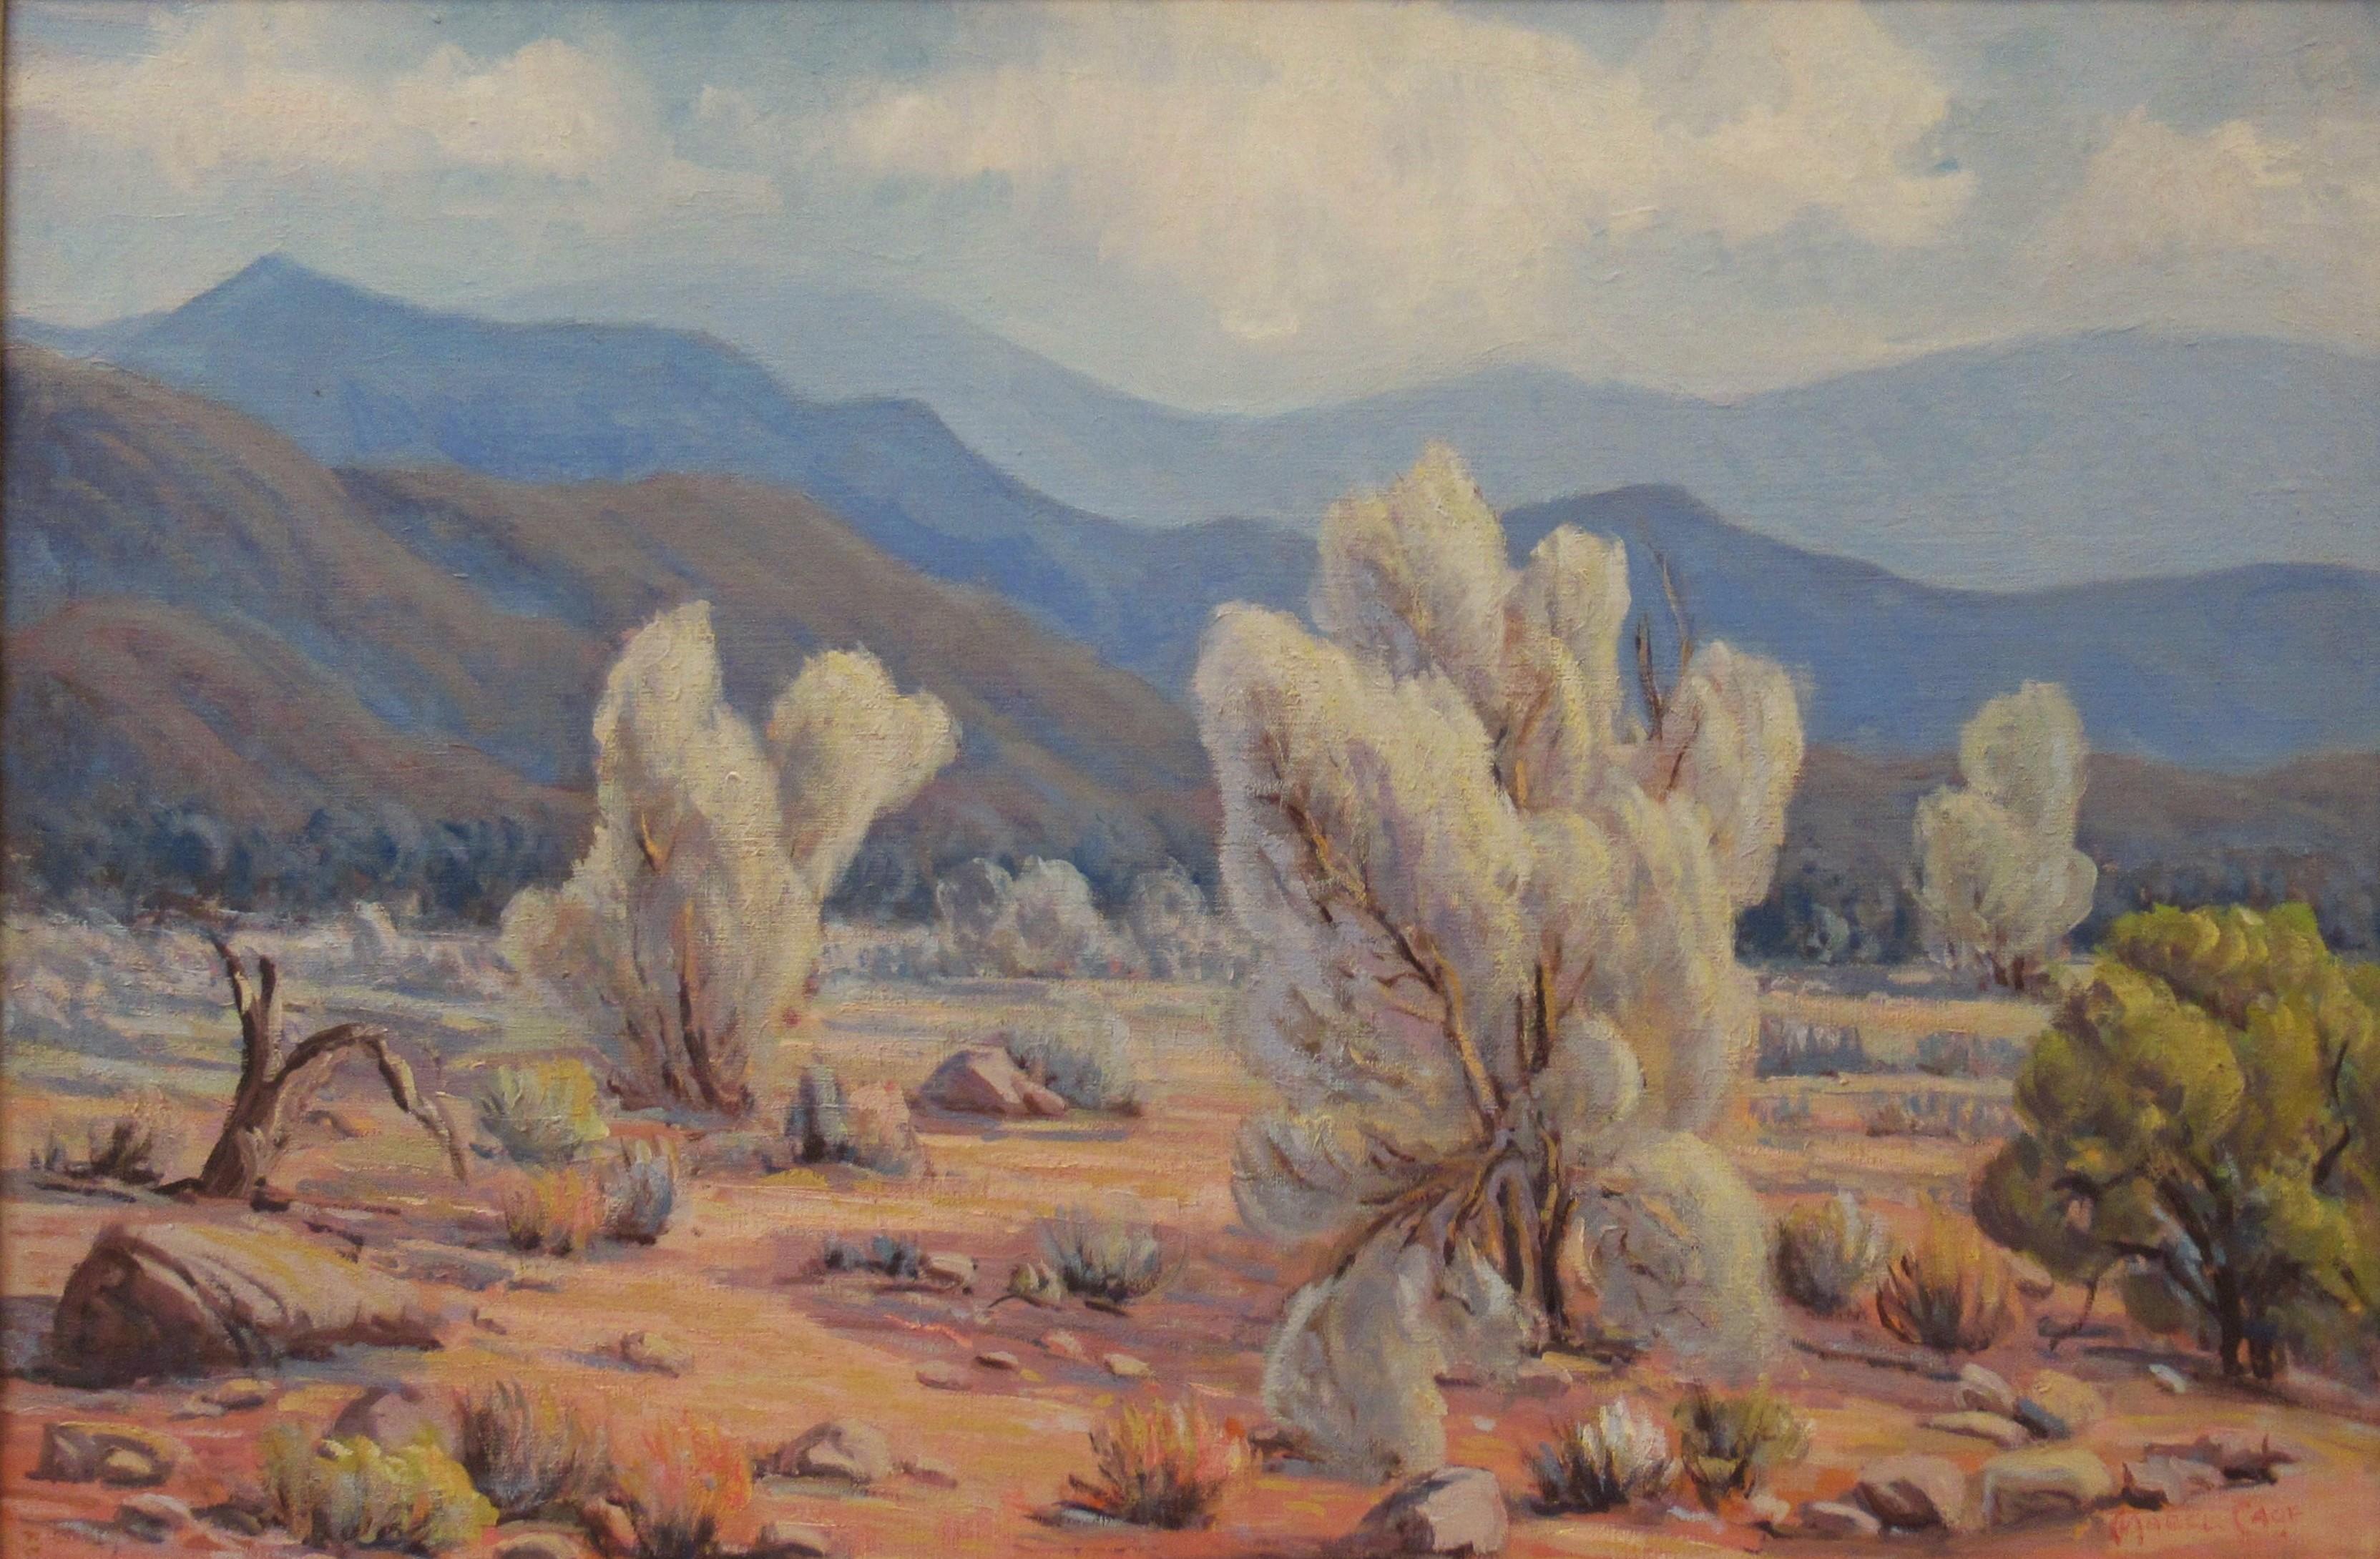 On the Road to Palm Spring - Painting by Mabel Vinson Cage